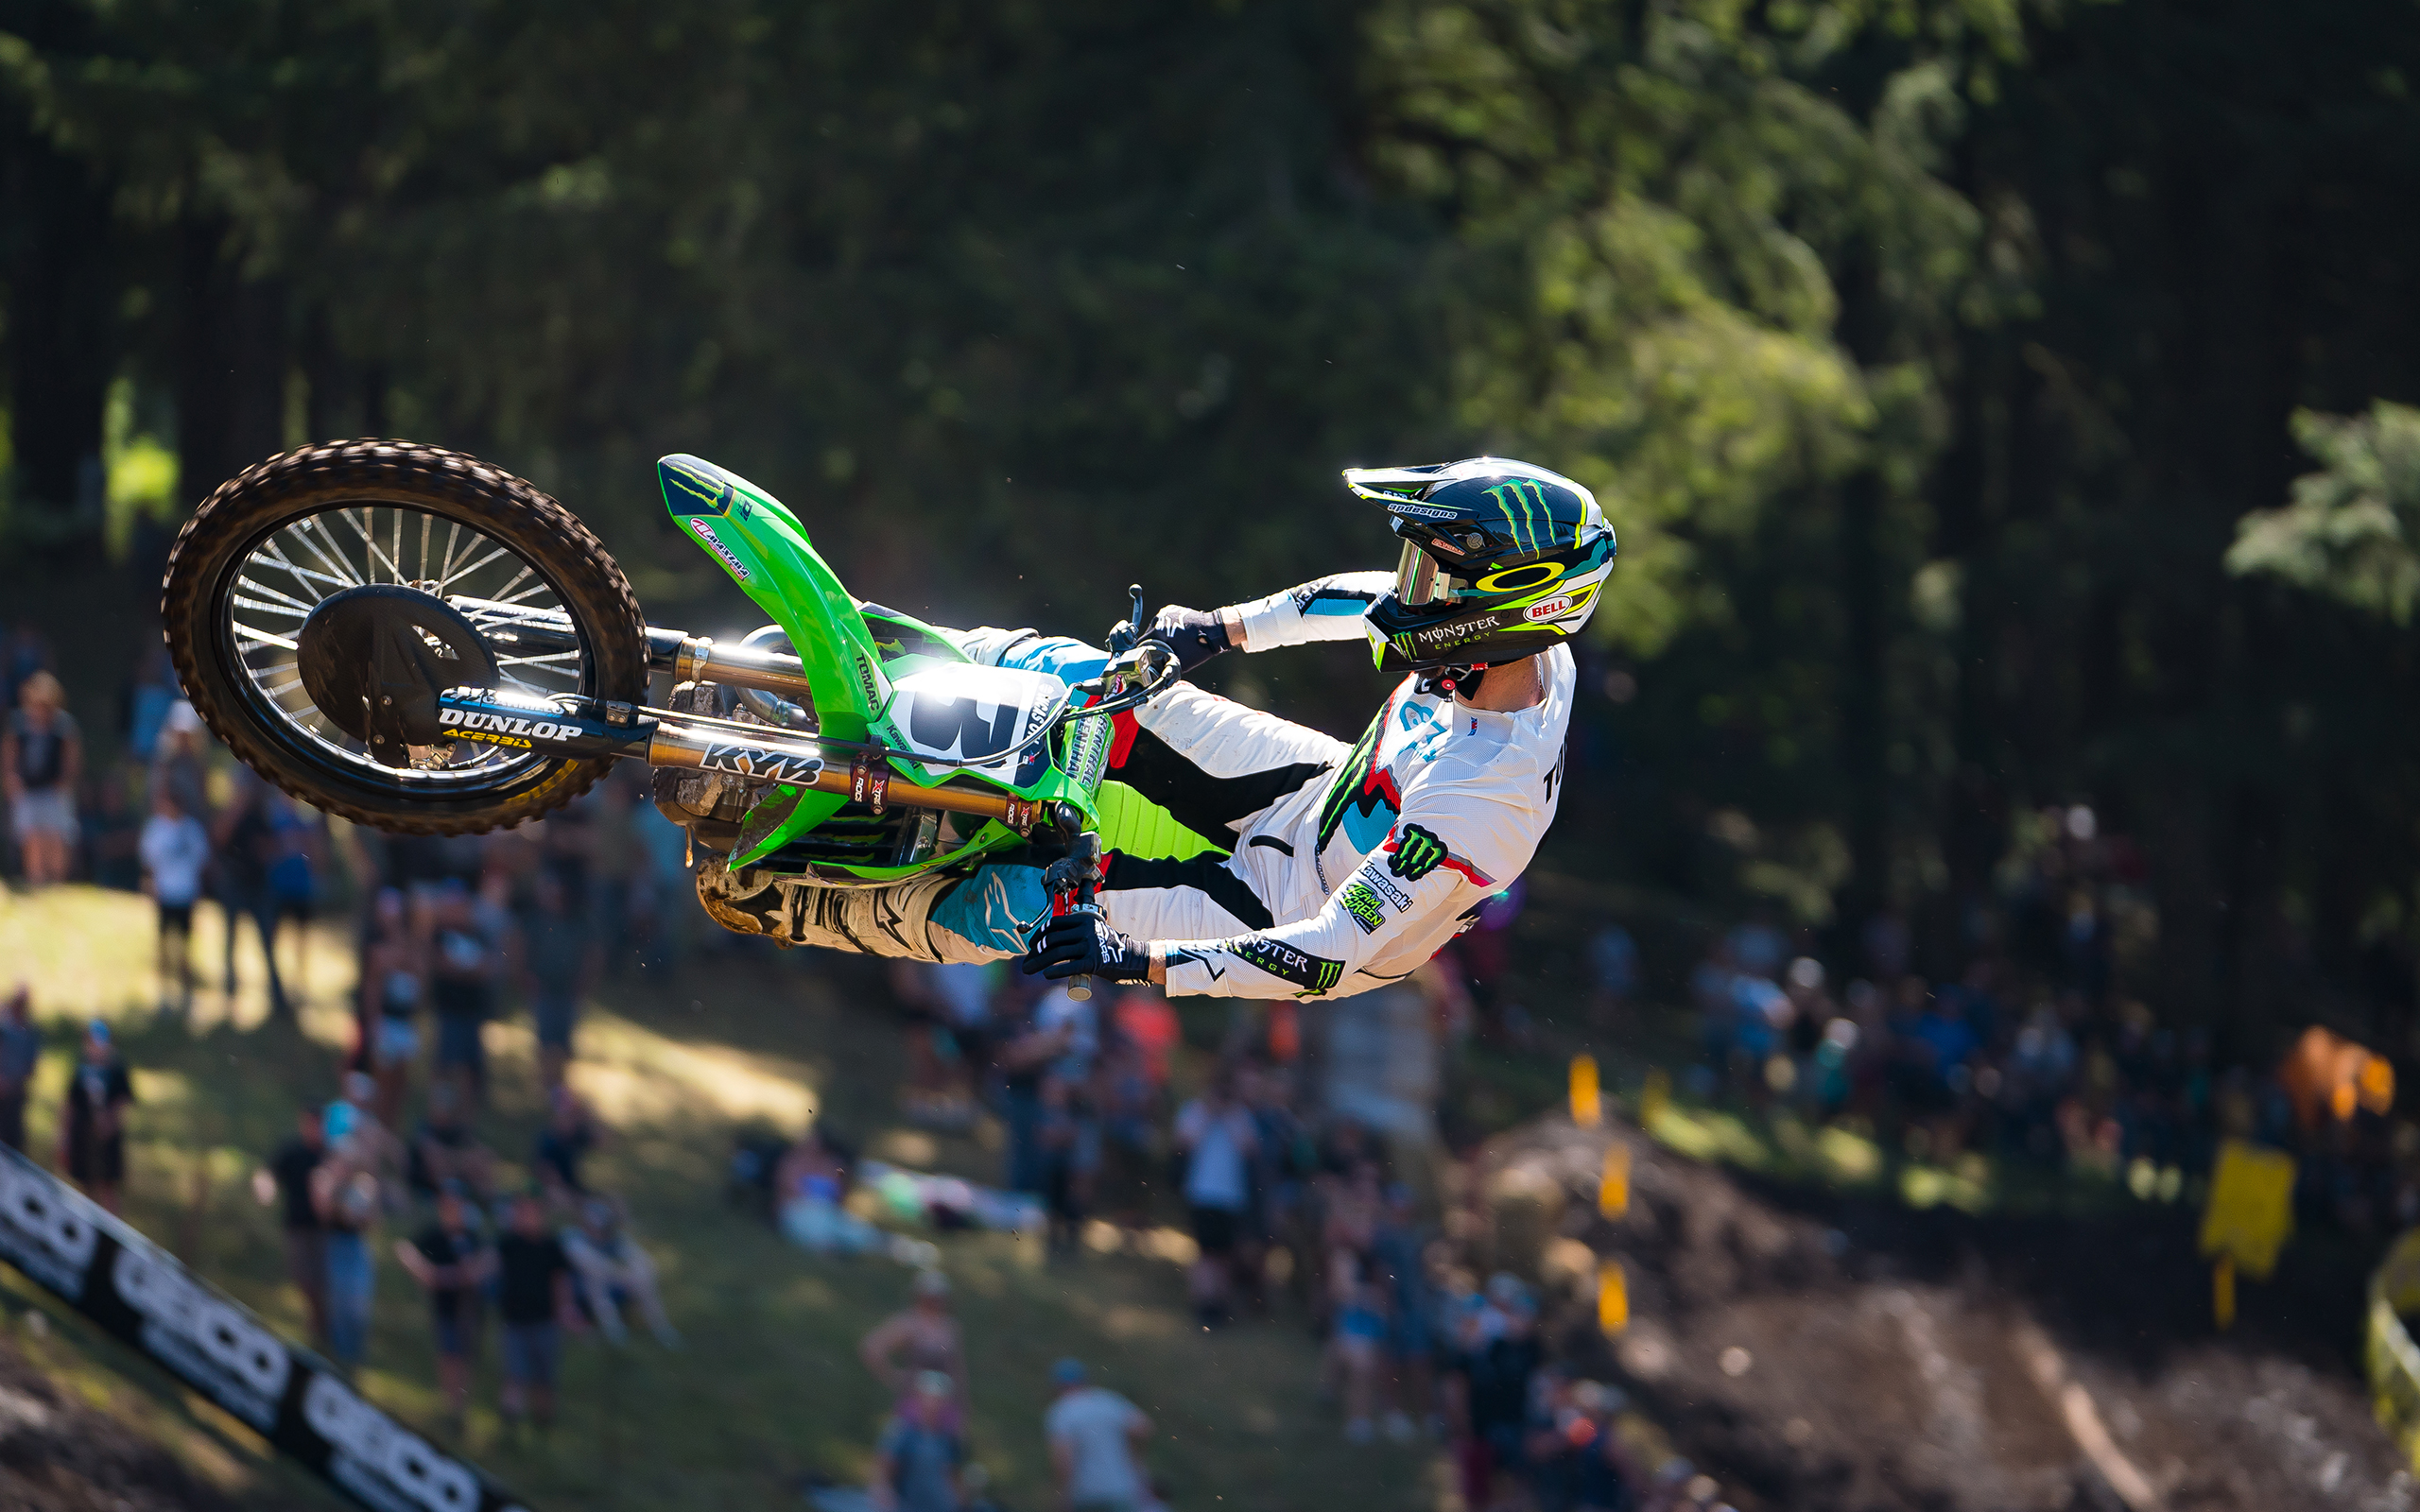 Free download 2021 Washougal Motocross Road Jump Wallpapers Swapmoto ...